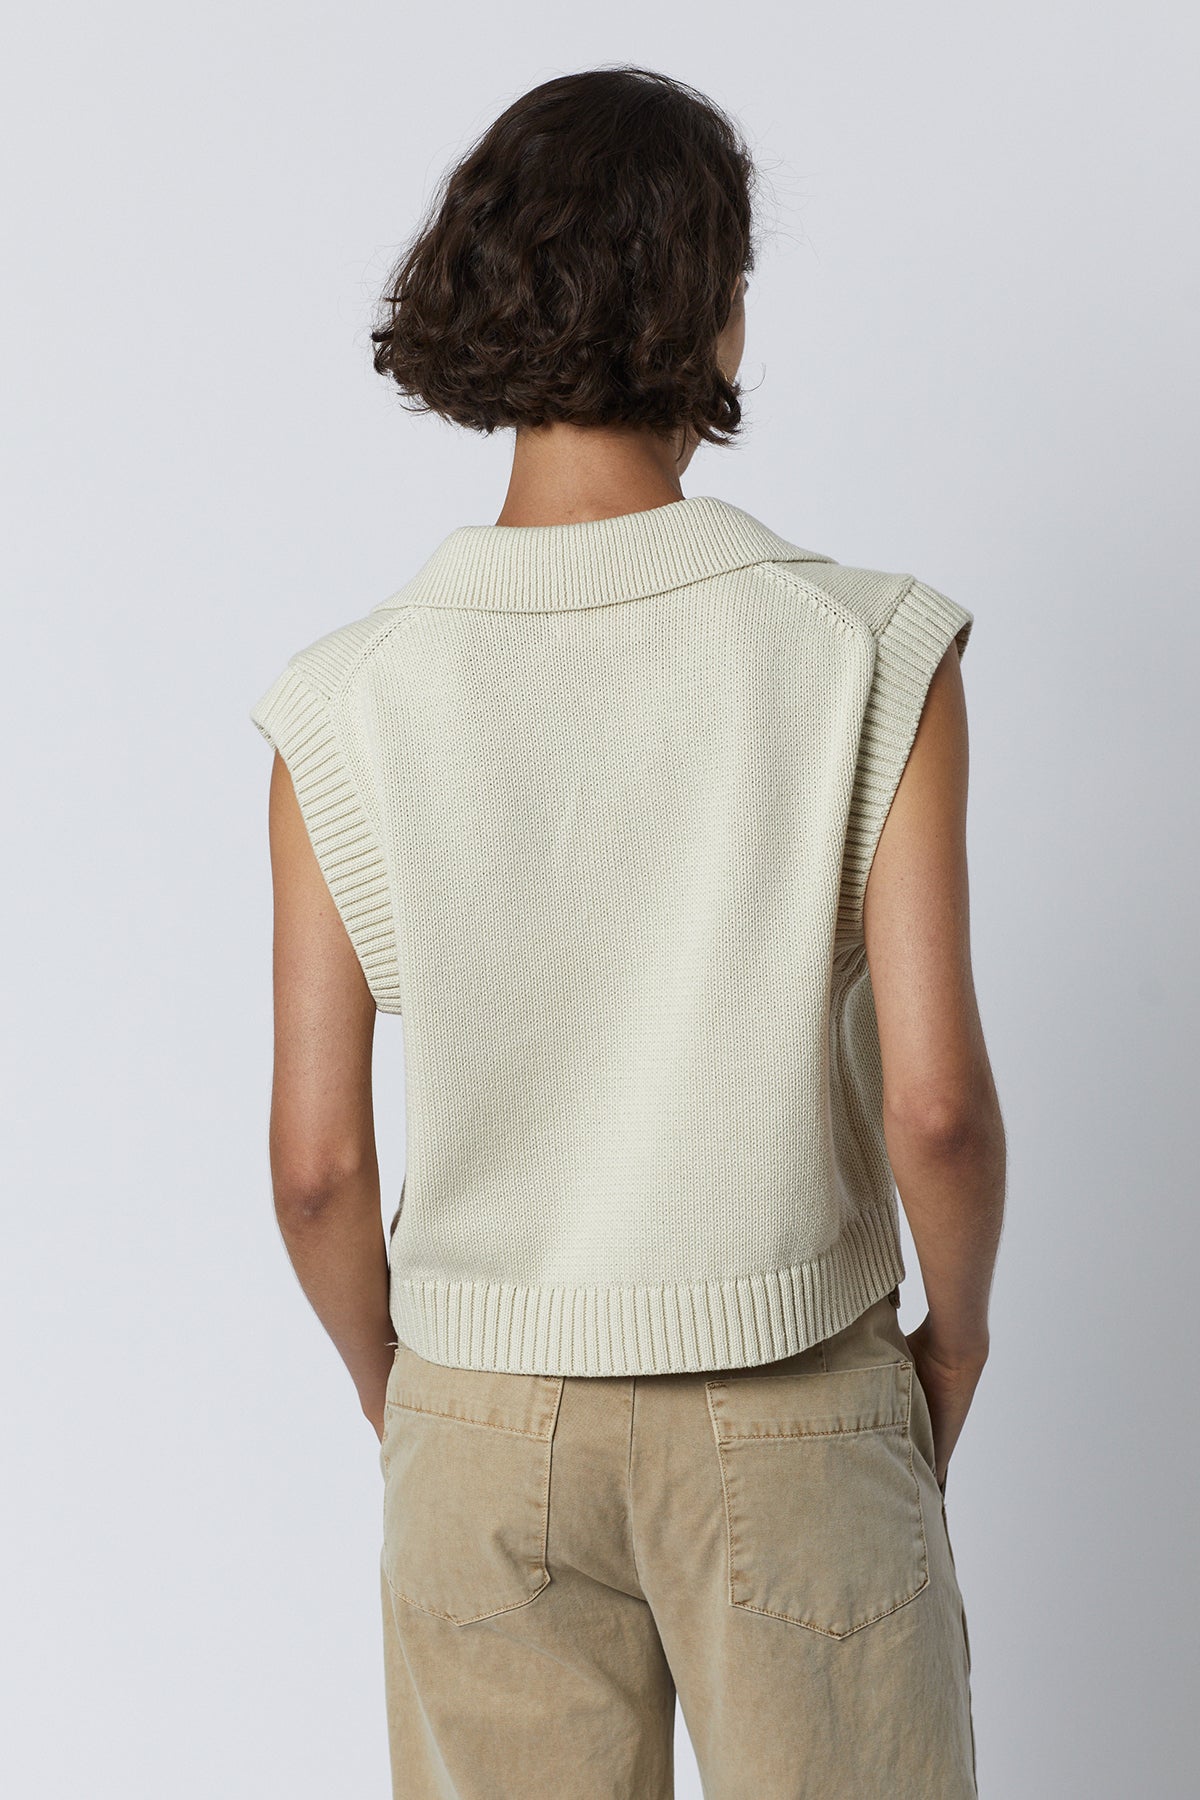 Avalon Sweater Tank in flax with Temescal pant back-26002773541057